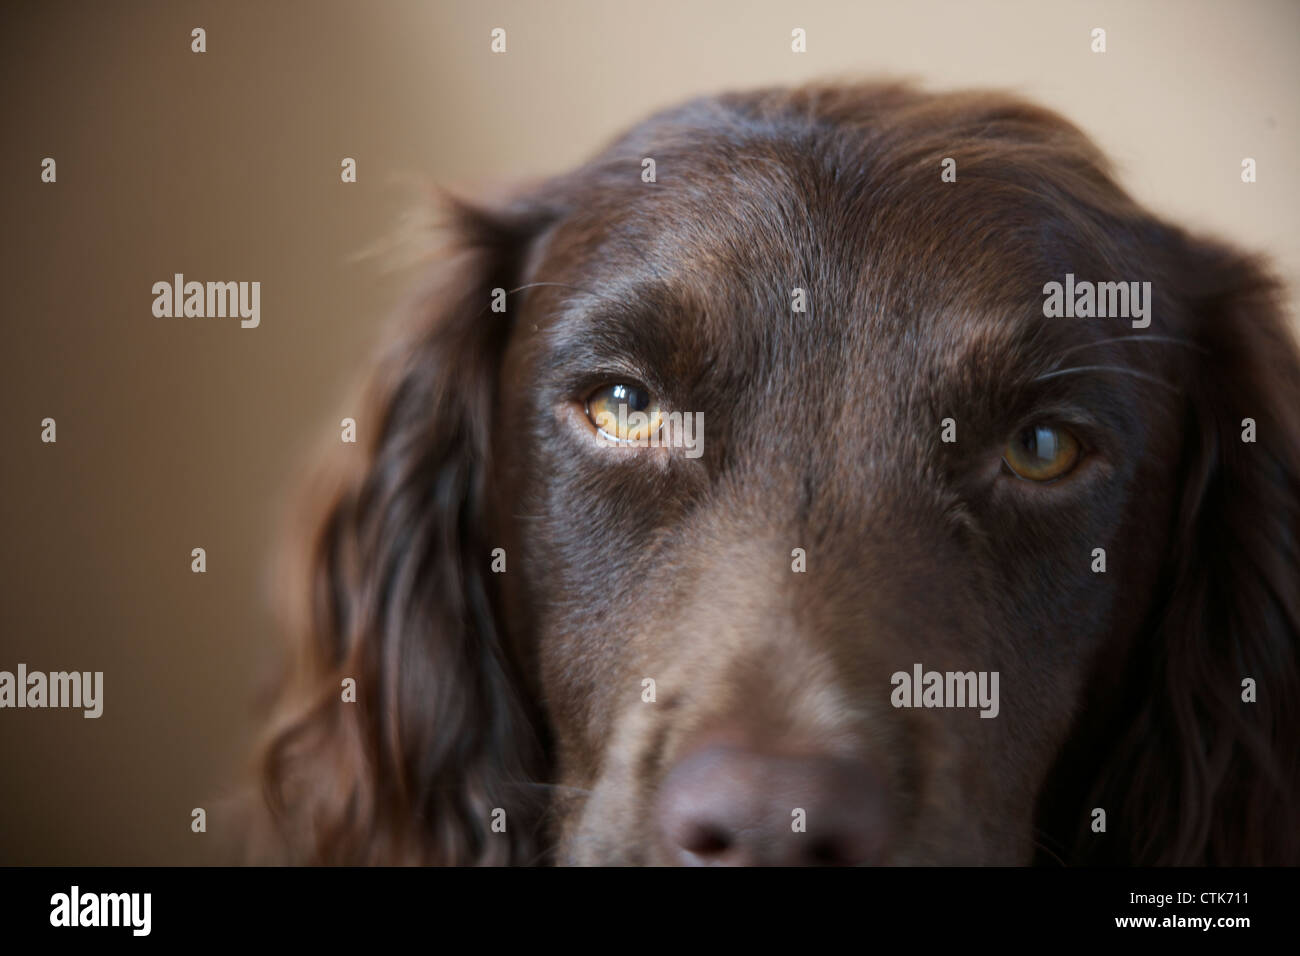 Tight head shot of a working cocker spaniel, focusing on the eyes Stock Photo